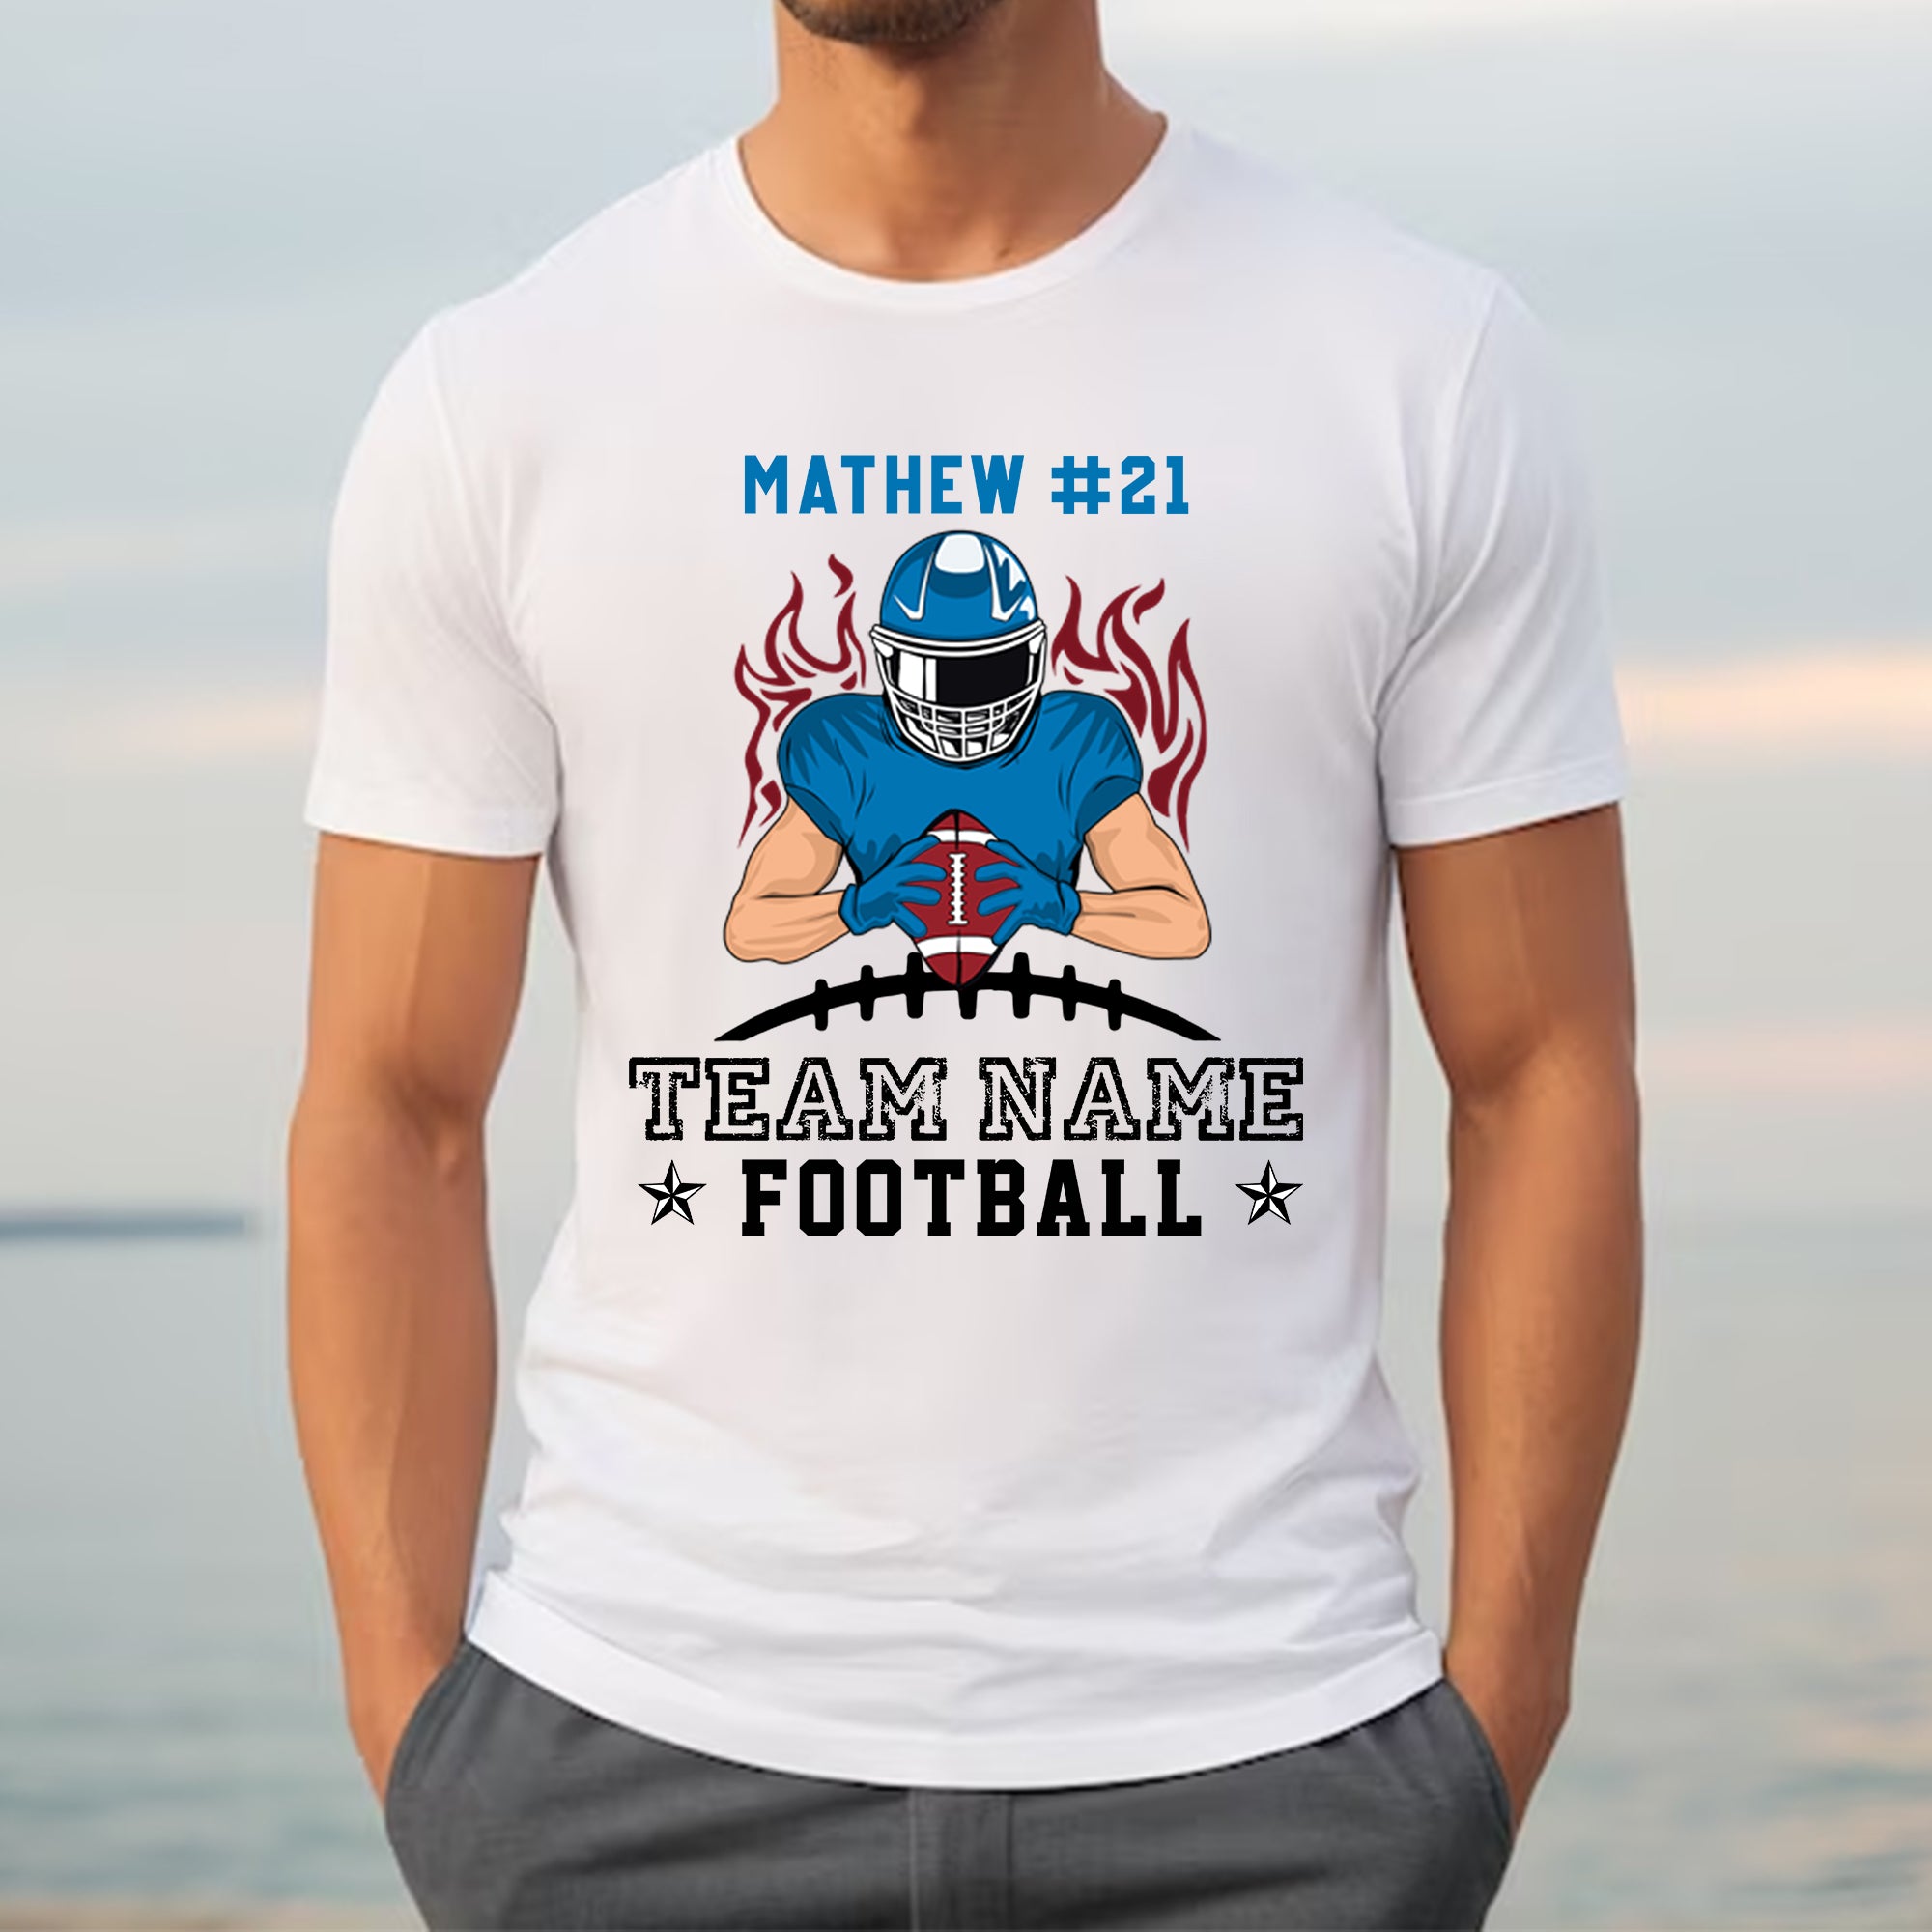 Football Team - Custom Appearance And Name - Personalized T-Shirt - Football Lovers